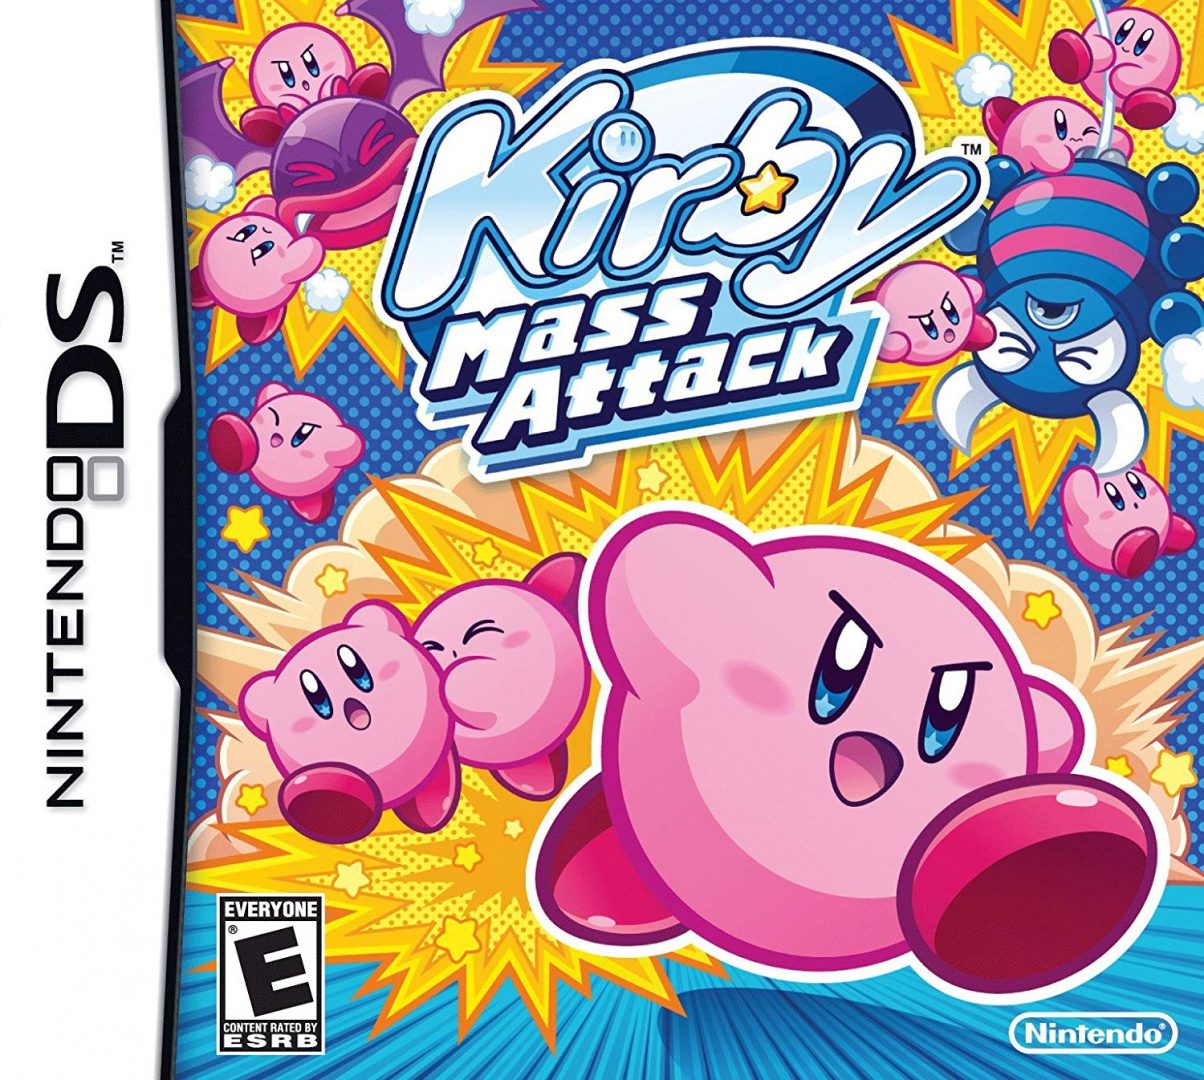 The coverart image of Kirby Mass Attack [+AP FIX Patched]